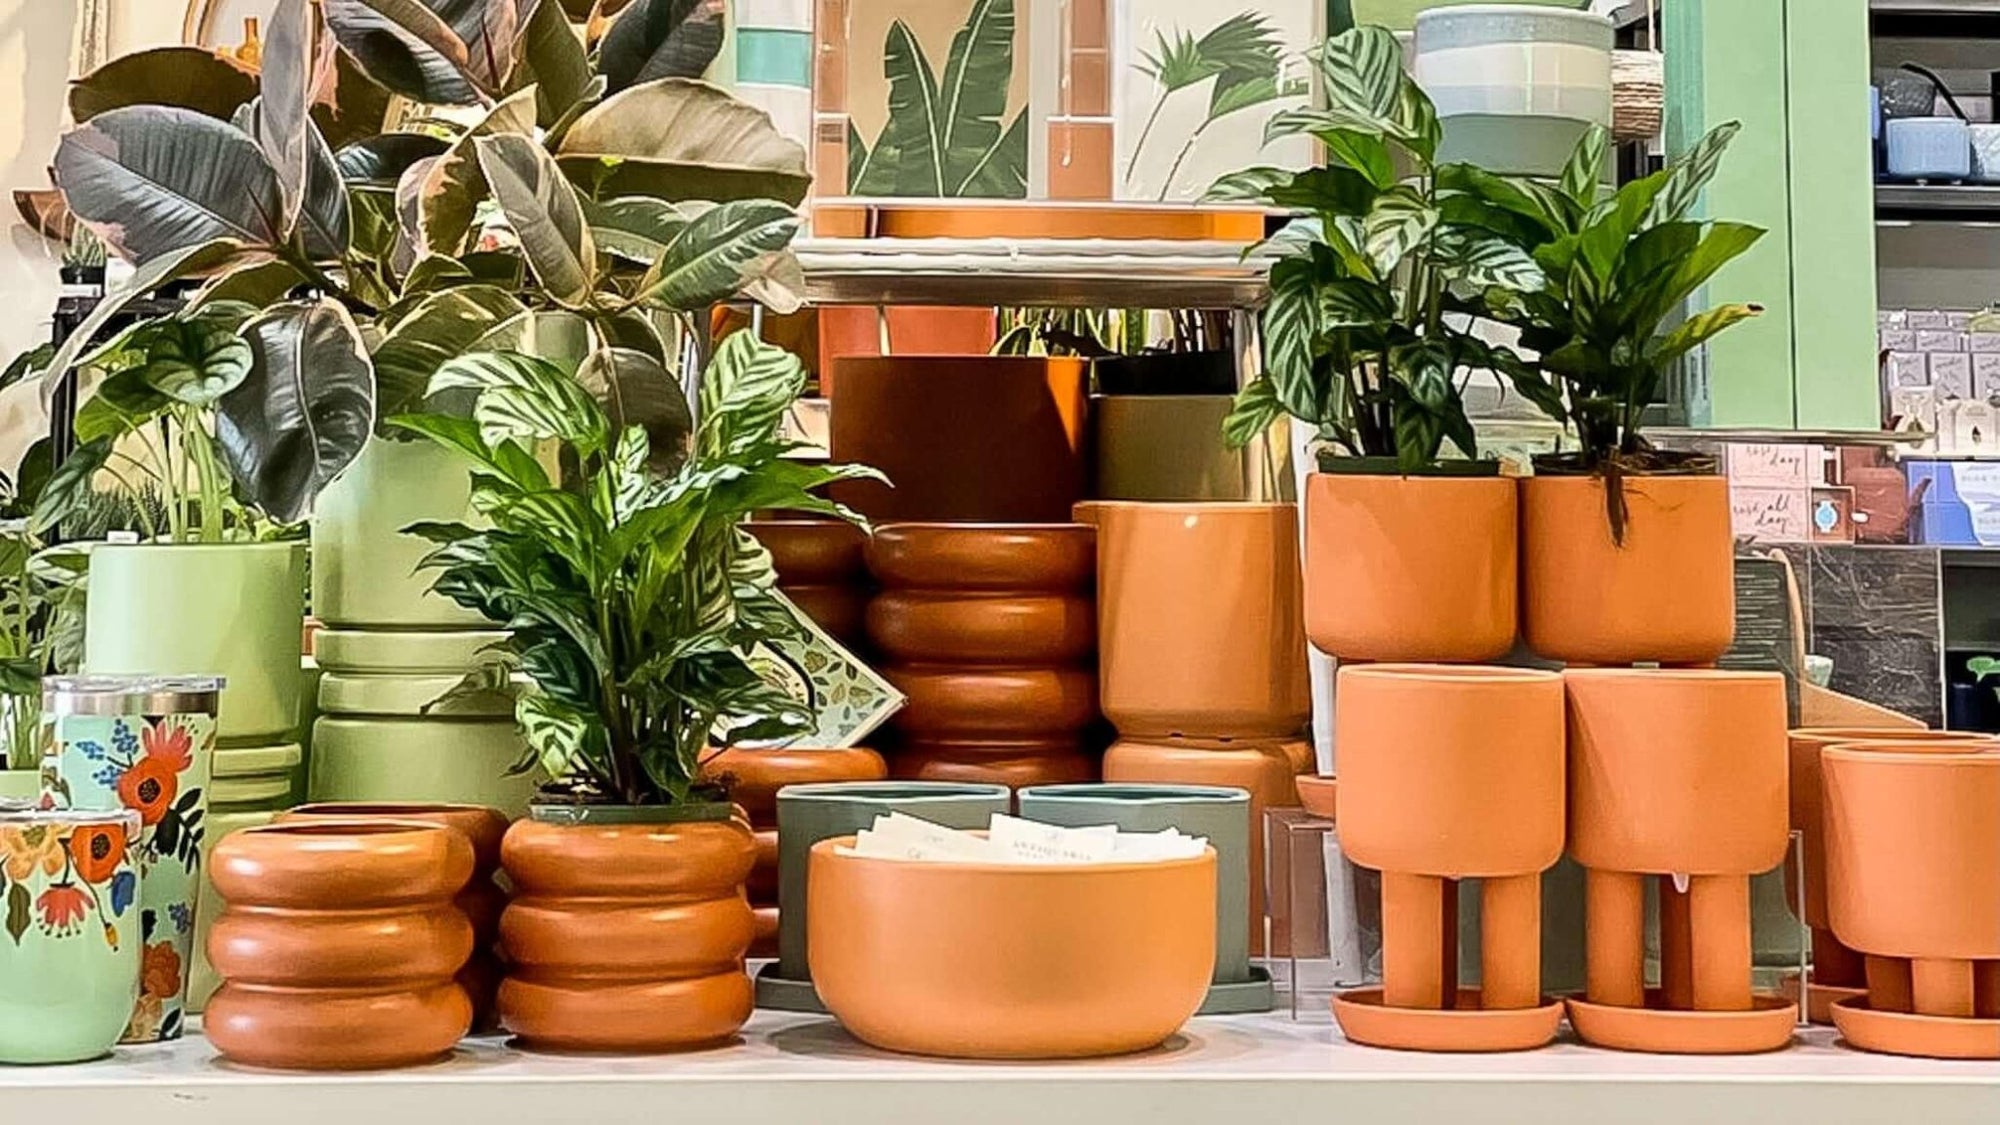 14 Houseplants to Add Style to Your Space - Green Fresh Florals + Plants